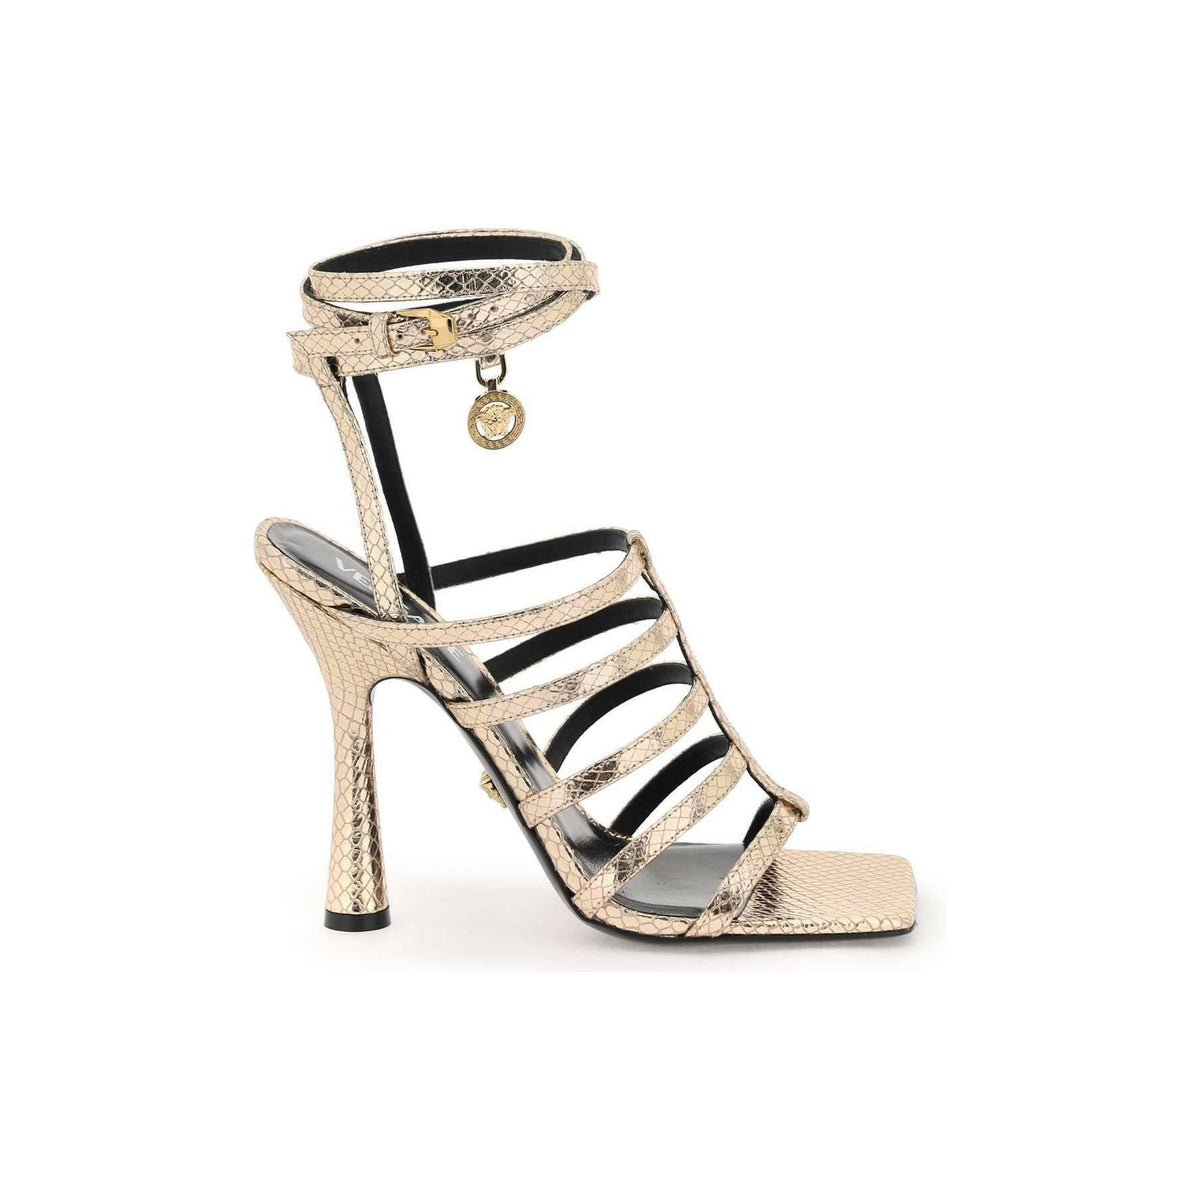 Champagne Gold Snake-Effect Lycia Structure Sandals With Medusa Charm VERSACE JOHN JULIA.